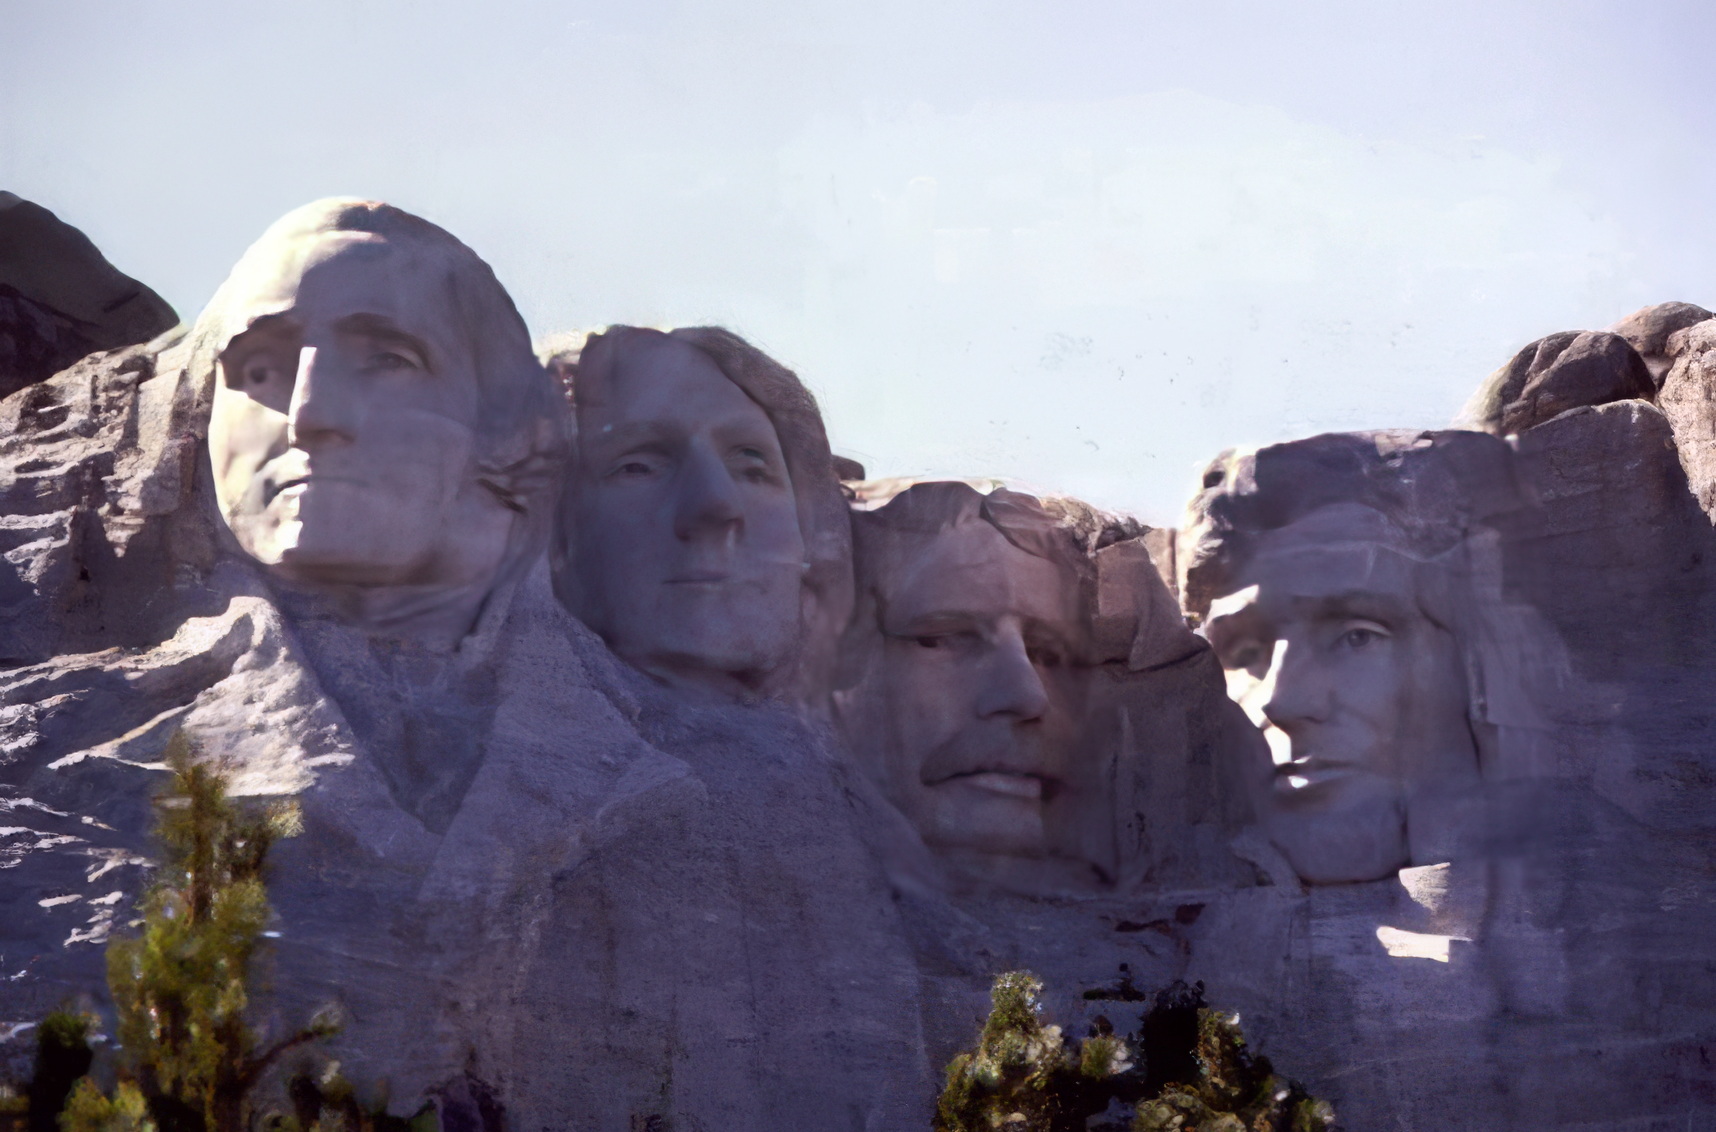 Faces of presidents Washington, Jefferson, T. Roosevelt, and Lincoln carved into a mountainside.